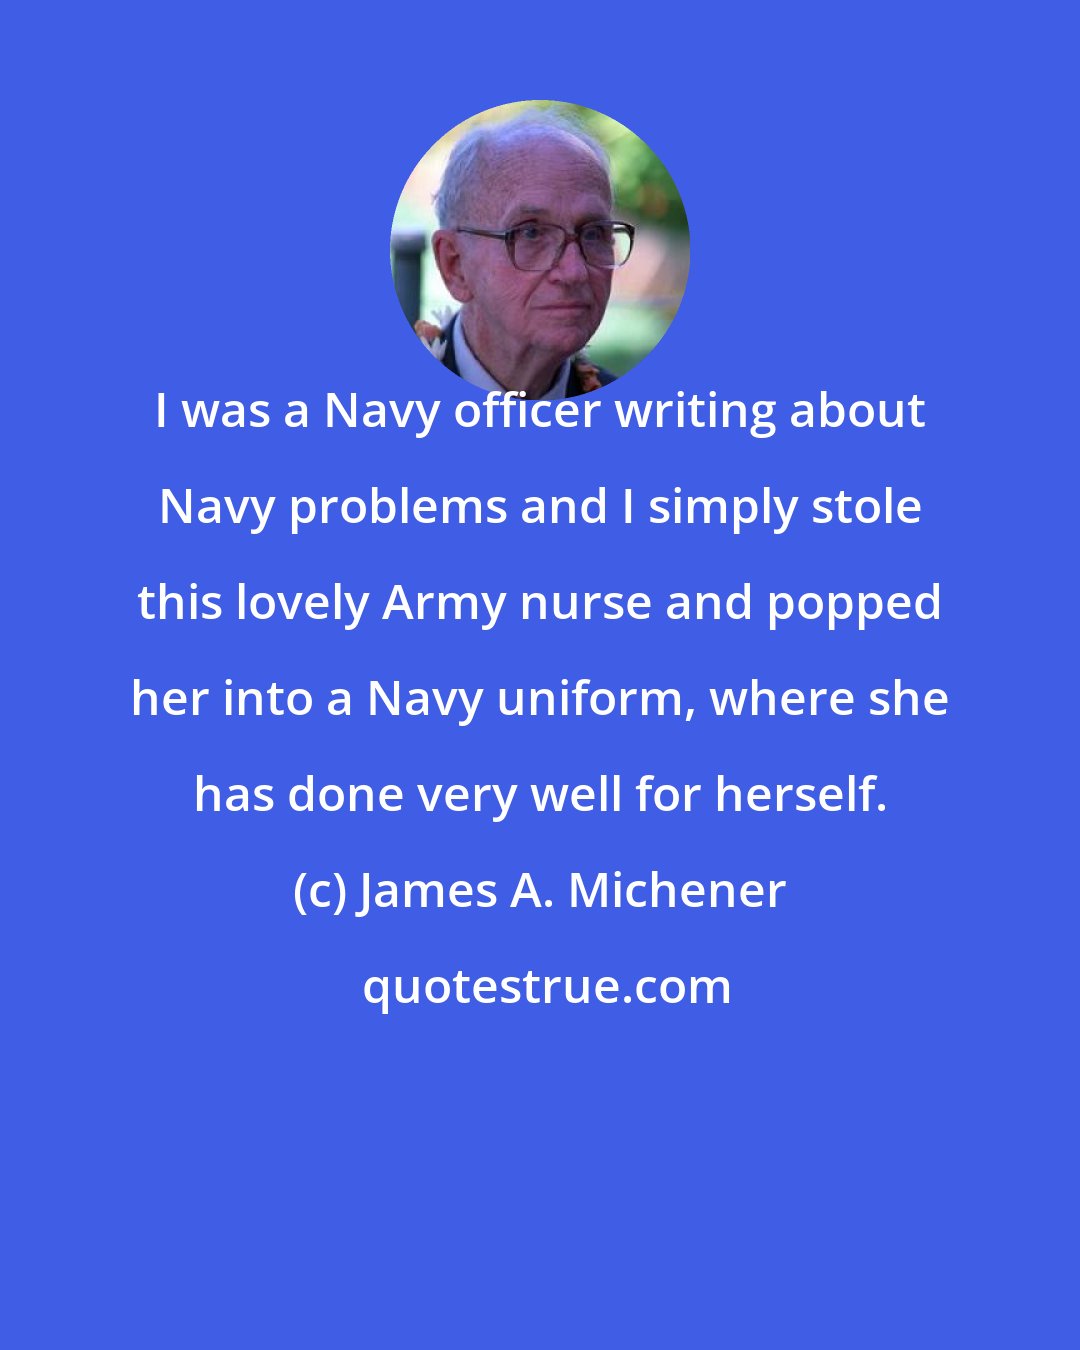 James A. Michener: I was a Navy officer writing about Navy problems and I simply stole this lovely Army nurse and popped her into a Navy uniform, where she has done very well for herself.